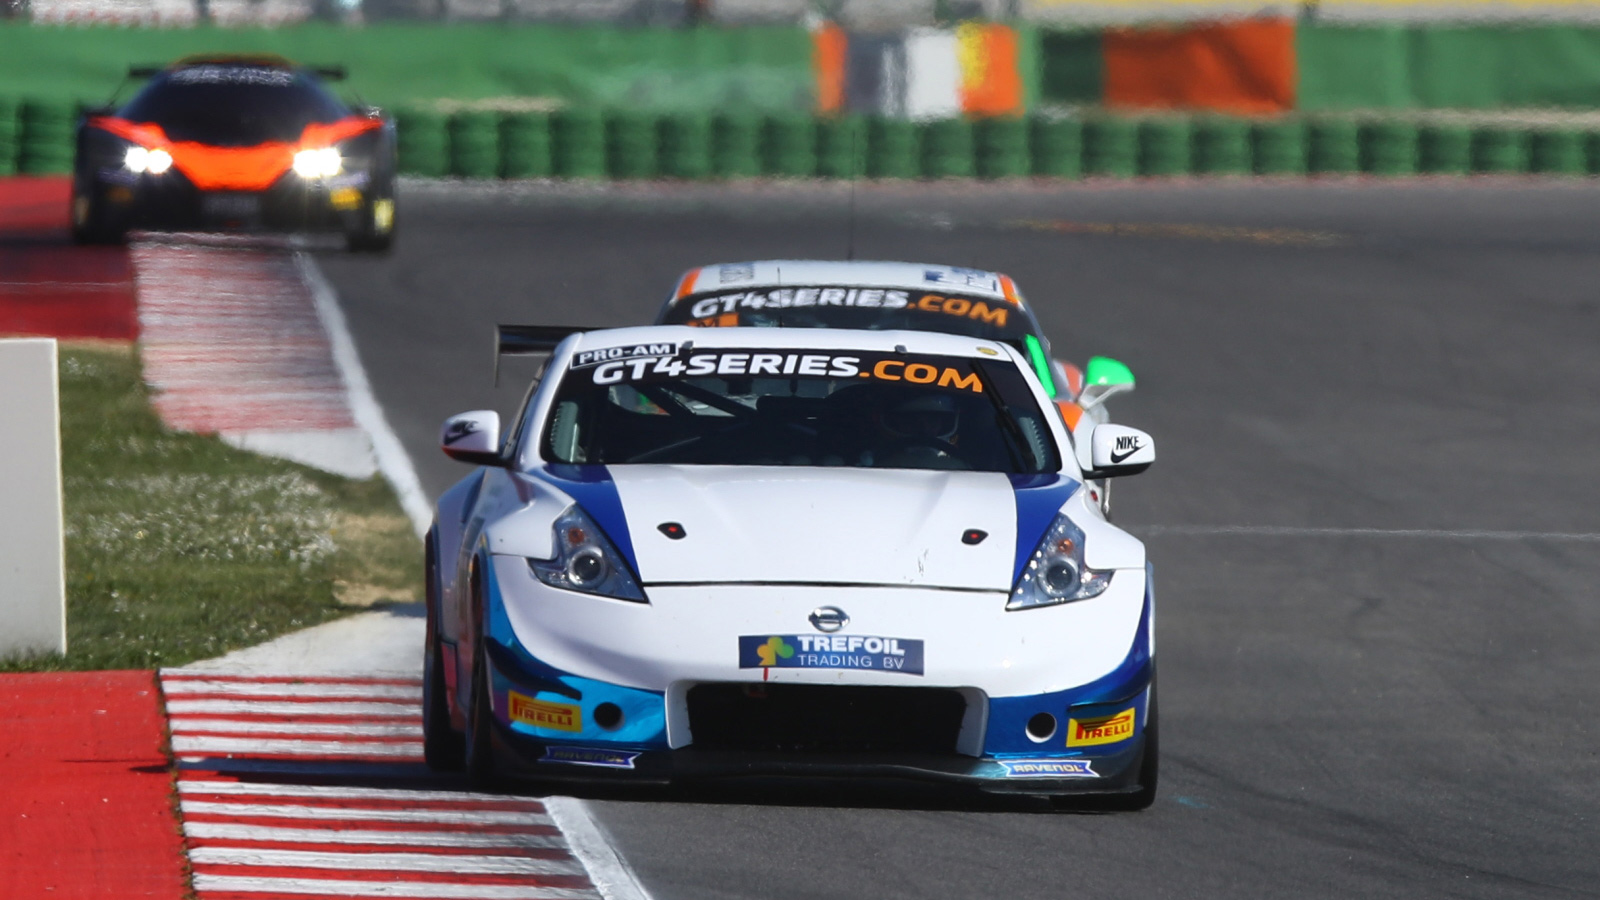 Team encouraged by strong start to first ever endurance season.